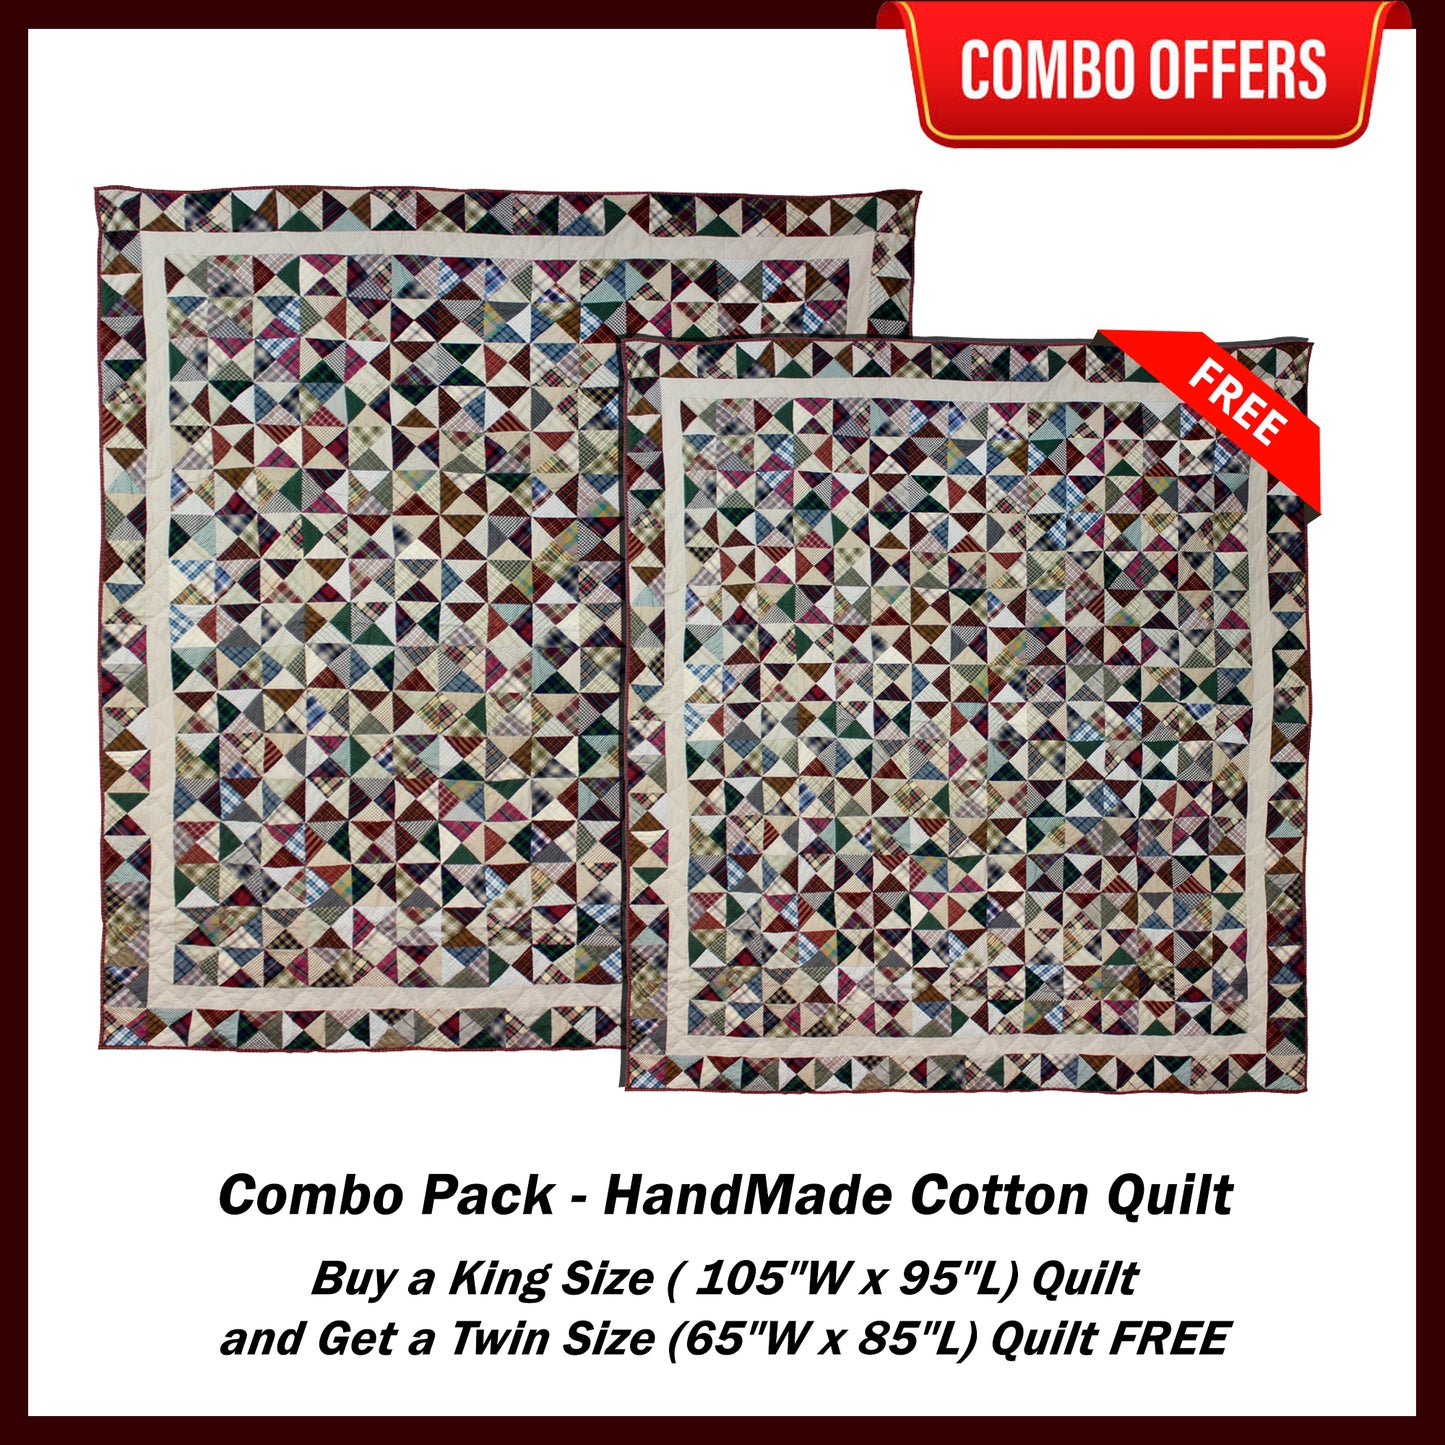 Kaleidoscope Handmade Cotton Quilt - Buy a King Size Quilt and Get a Twin Size Quilt FREE